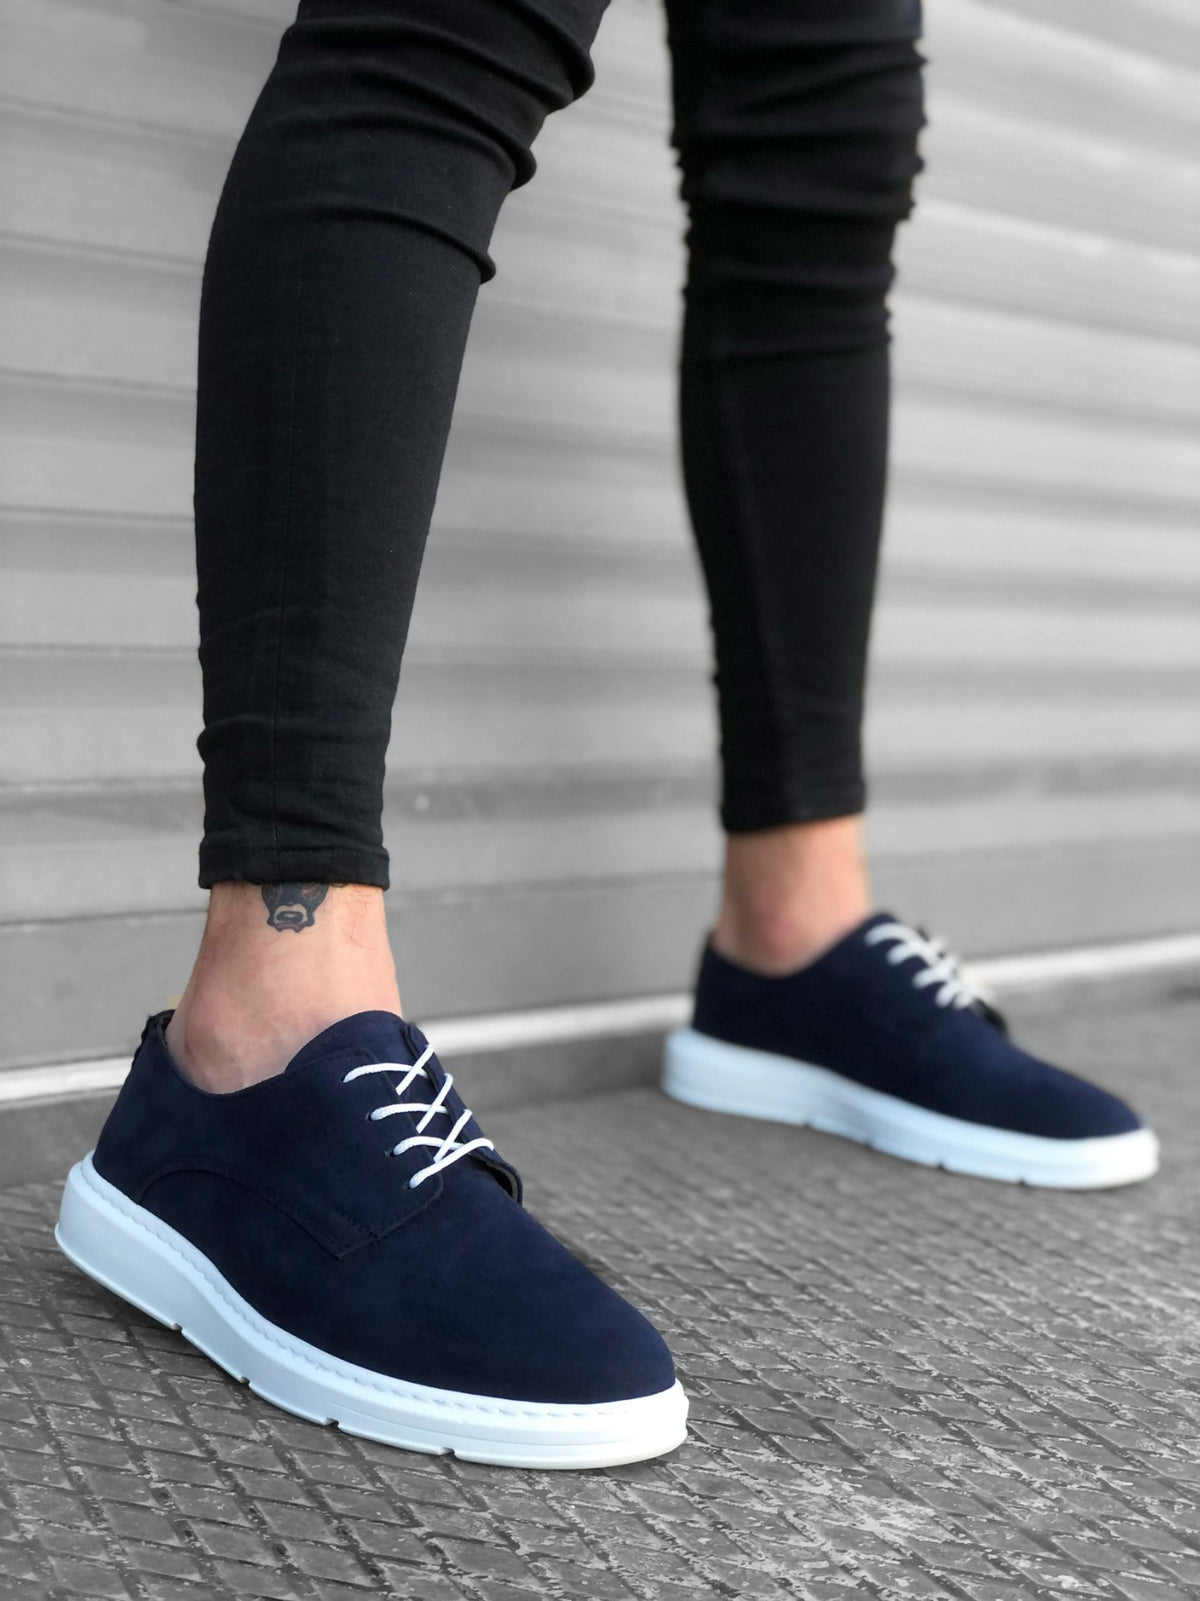 BA0003 Lace-up Classic Sport Navy Blue Suede High Sole Casual Men's Shoes - STREETMODE ™